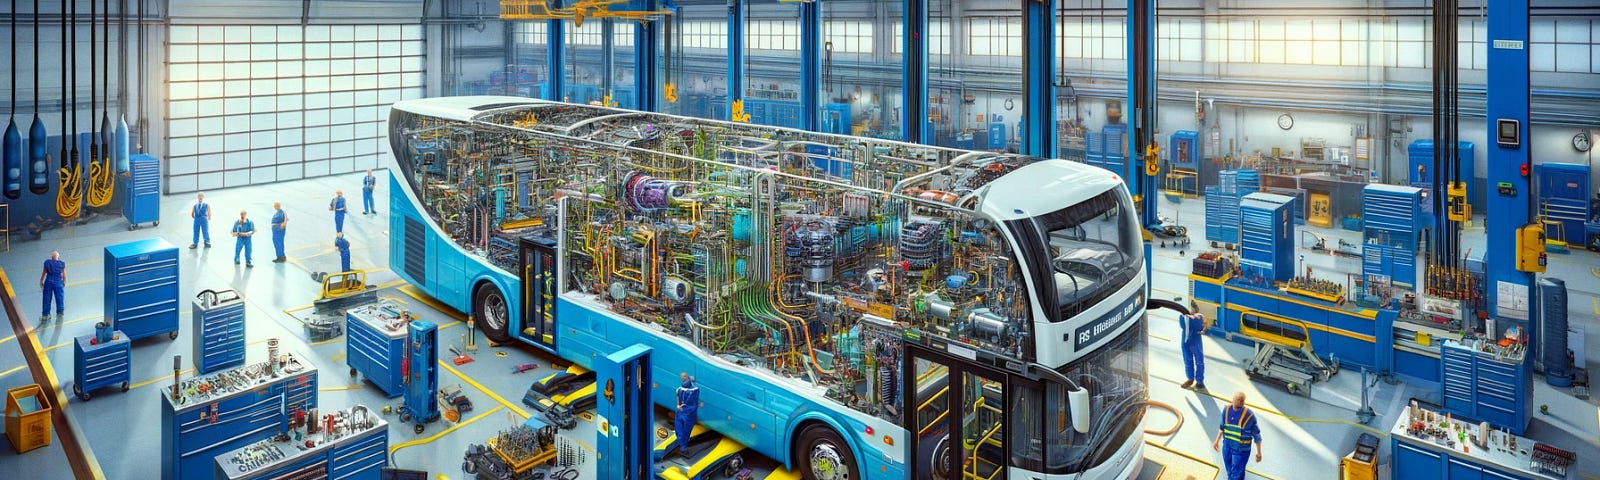 ChatGPT & DALL-E generated panoramic illustration that visualizes a hydrogen fuel cell bus, partially disassembled, within a bus maintenance depot.